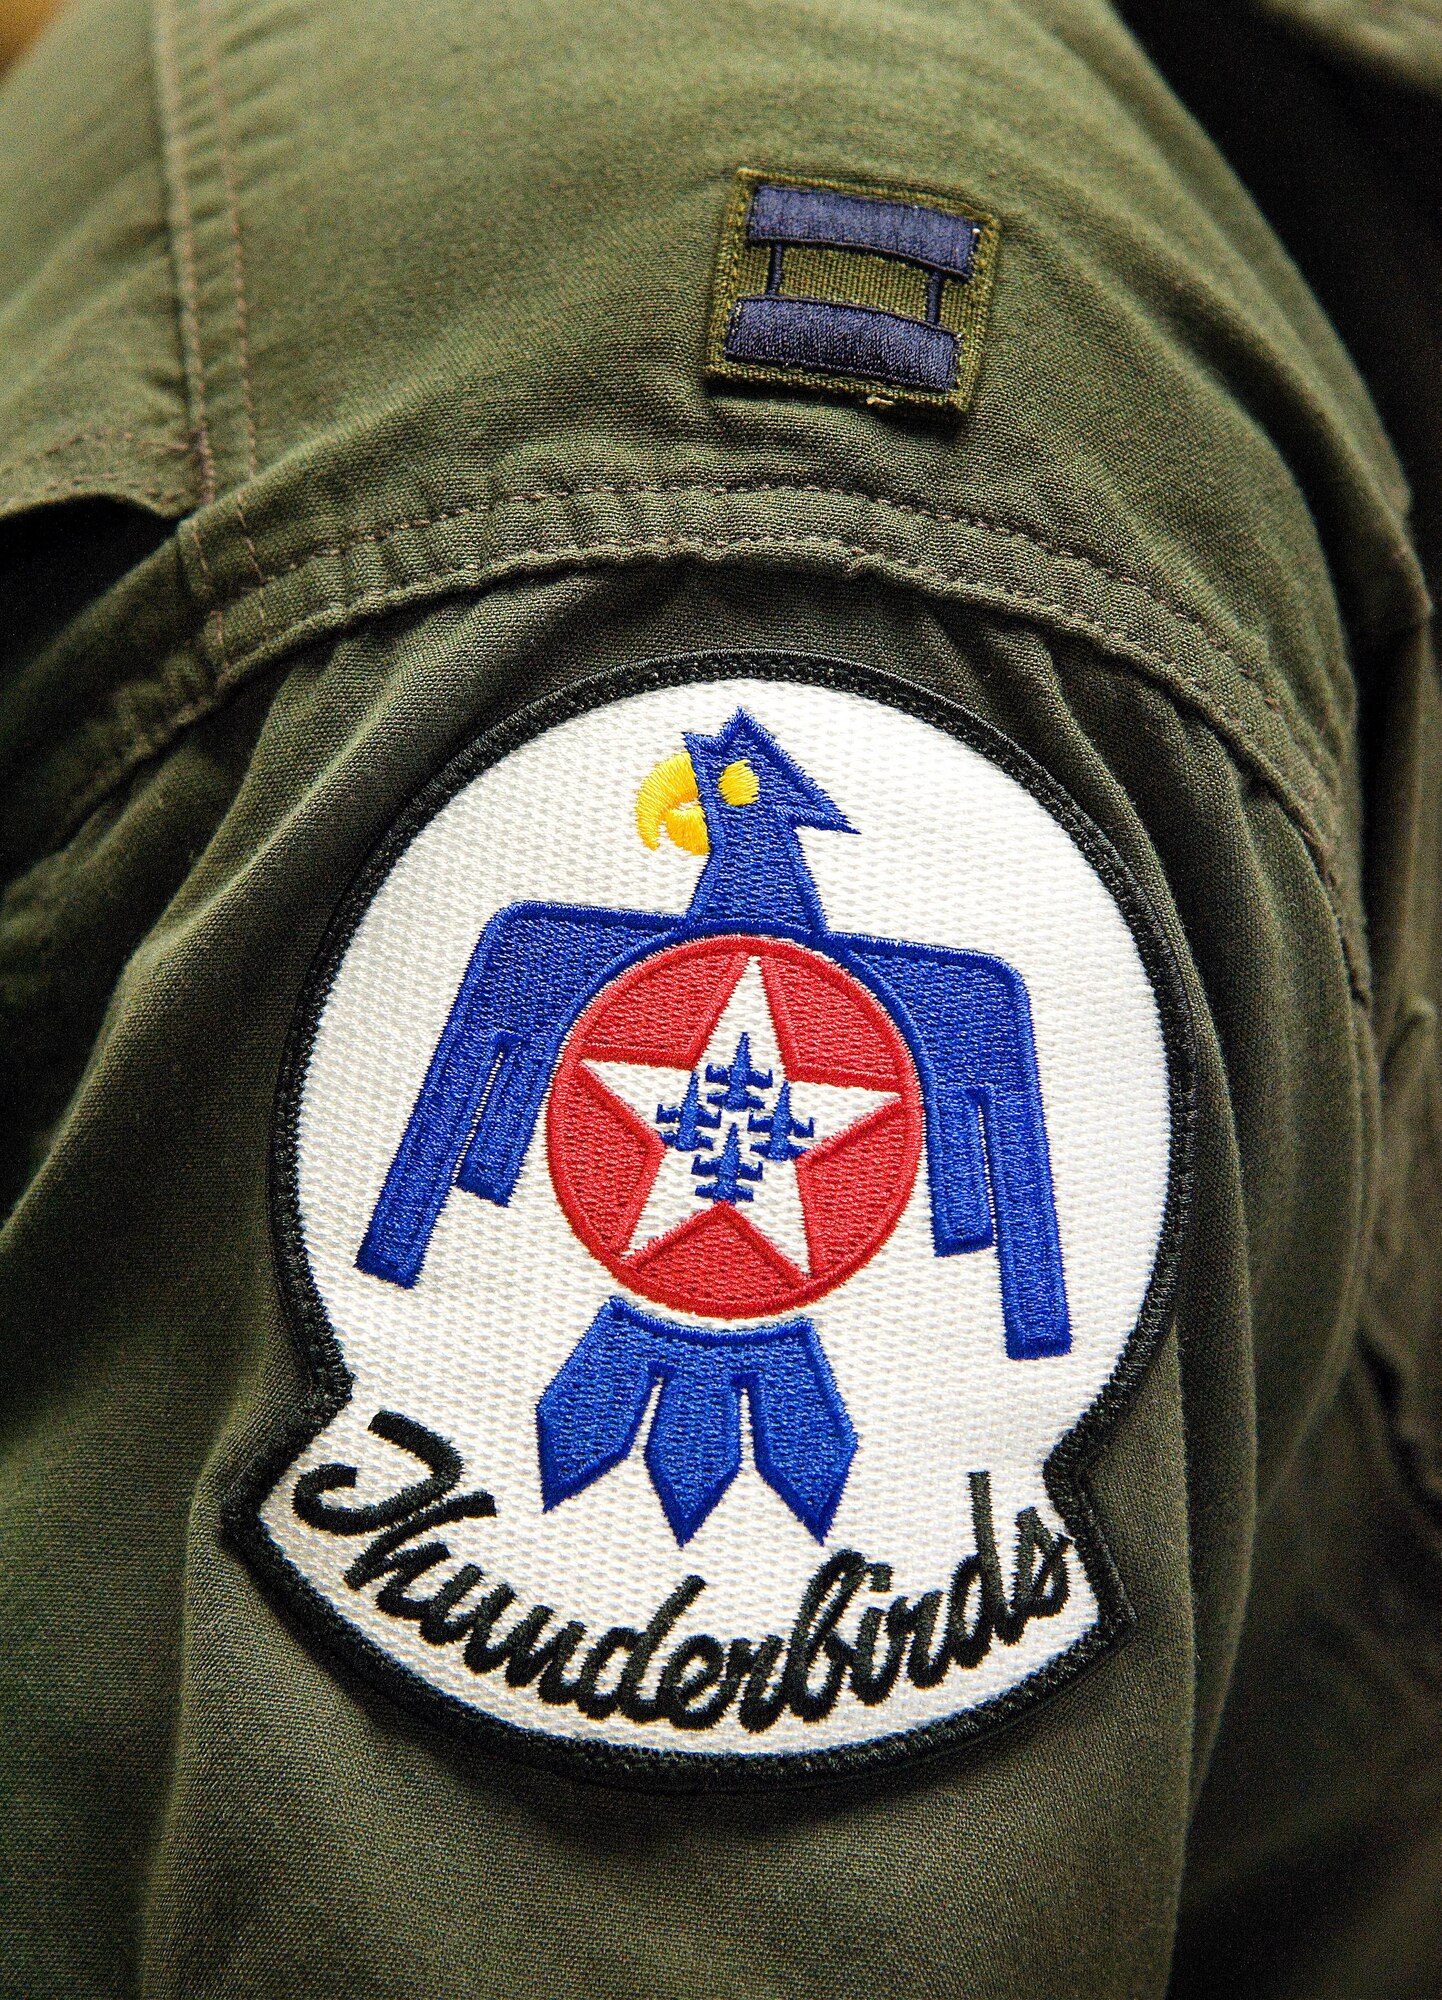 The U.S. Air Force Thunderbirds patch is worn on the flight suit of Capt. Erik "Speedy" Gonsalves, U.S. Air Force Thunderbirds advance pilot/narrator, Jan. 25, 2017, at Dover Air Force Base, Del. Gonsalves, along with Staff Sgt. Todd Hughes, tactical aircraft maintainer, visited Dover AFB to conduct a site survey for Dover's upcoming open house, scheduled for the last weekend in August. (U.S. Air Force photo by Roland Balik)